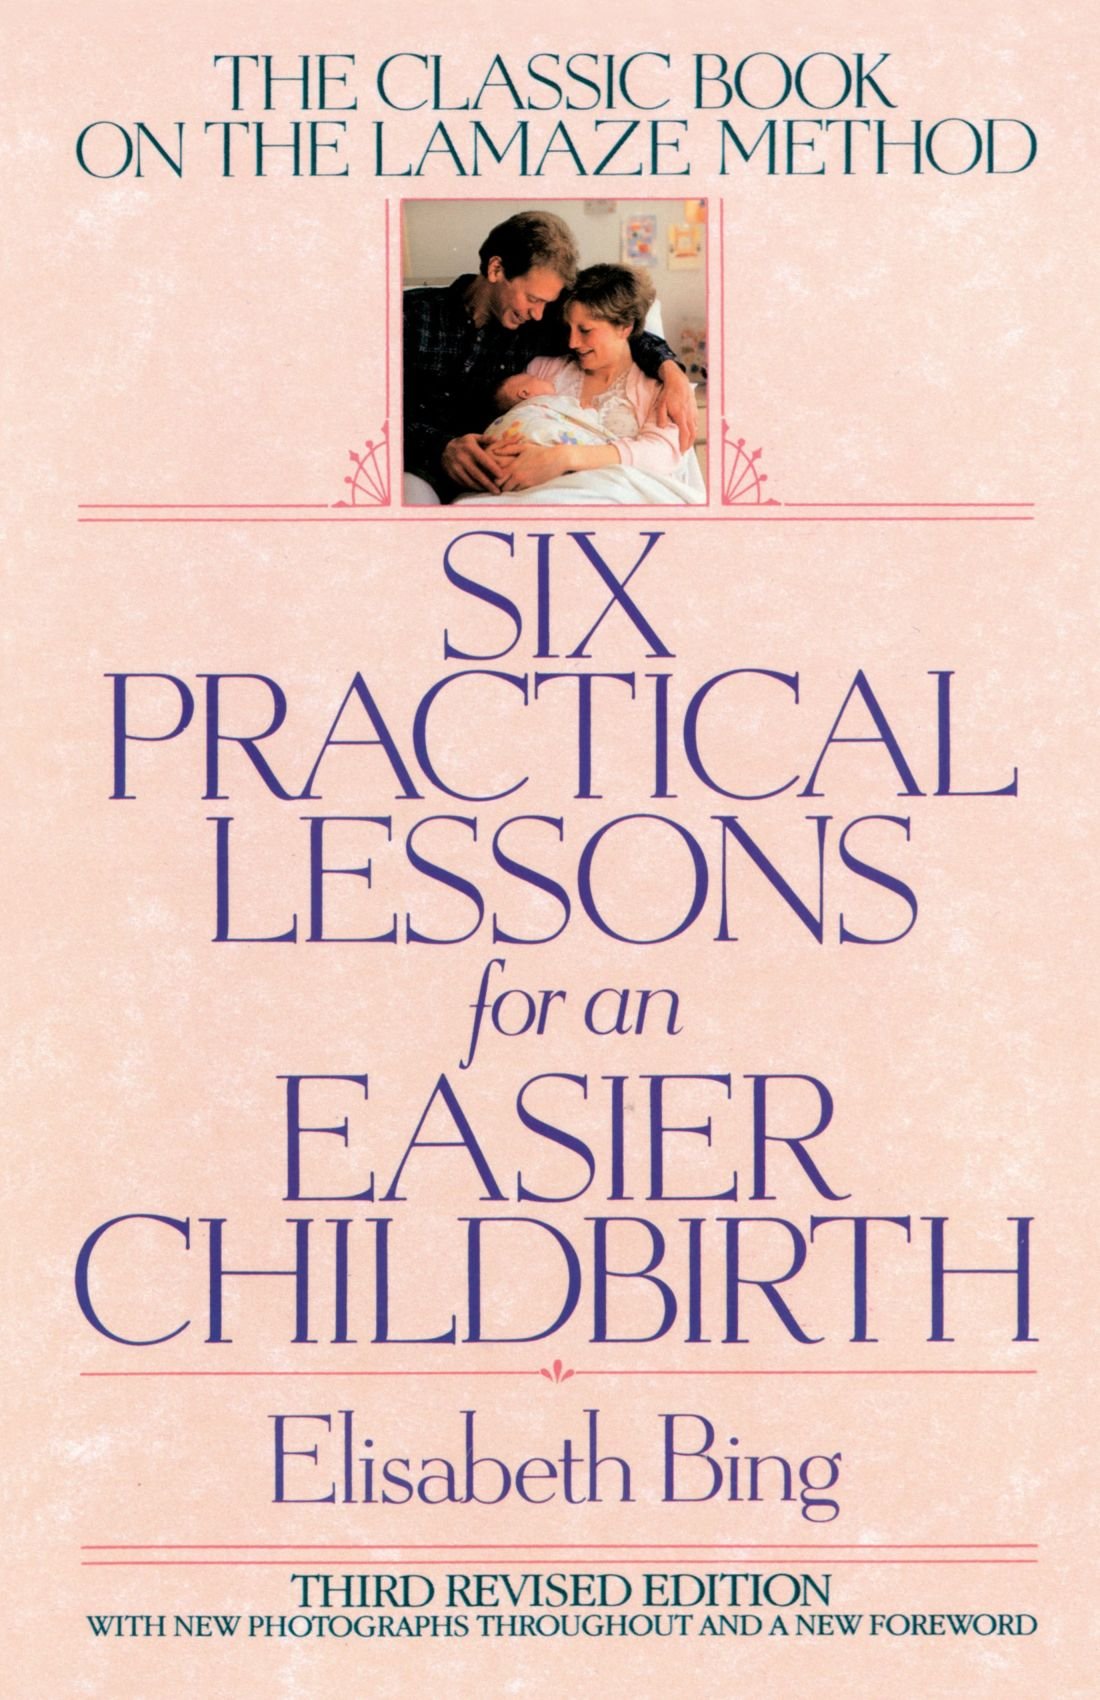 Cover of Elisabeth Bing's book, Six Practical Lessons for Easier Childbirth